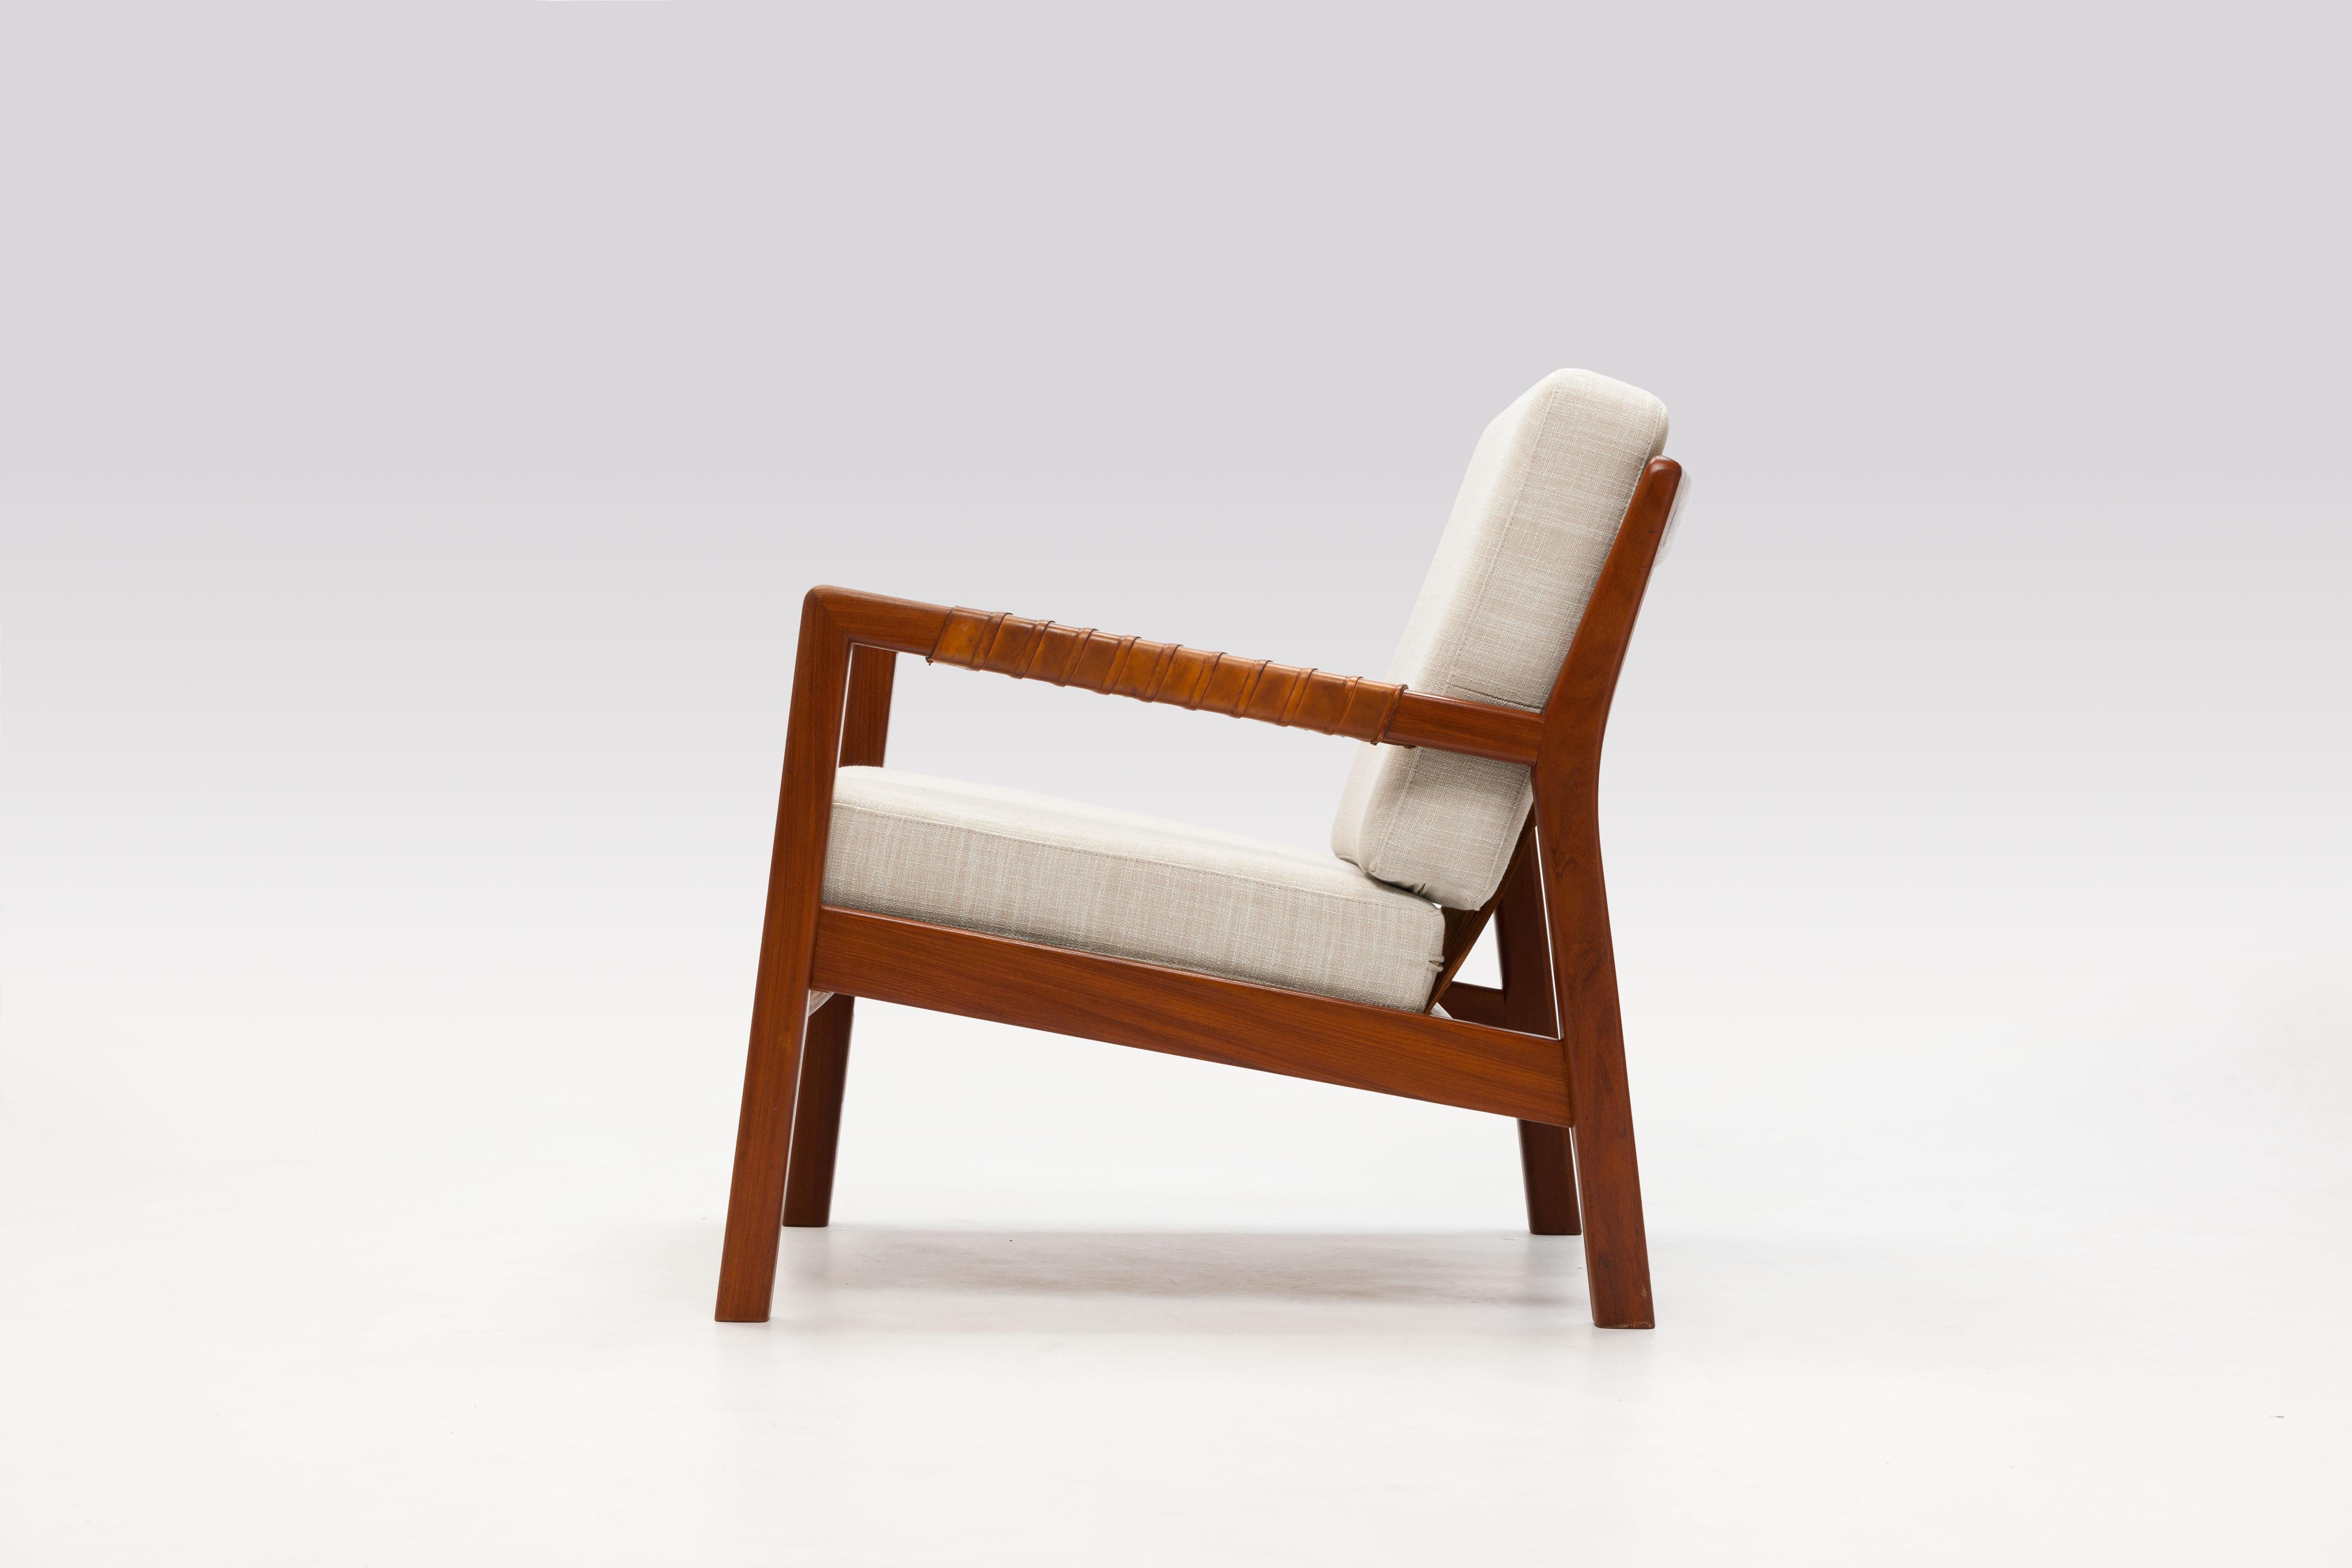 Chair 'Rialto' 's streamlined design and sophisticated details engage in a fascinating dialogue. The braided leather straps at the back and curved legs shaped from a single piece of wood give Rialto its unique appearance that especially comes to its